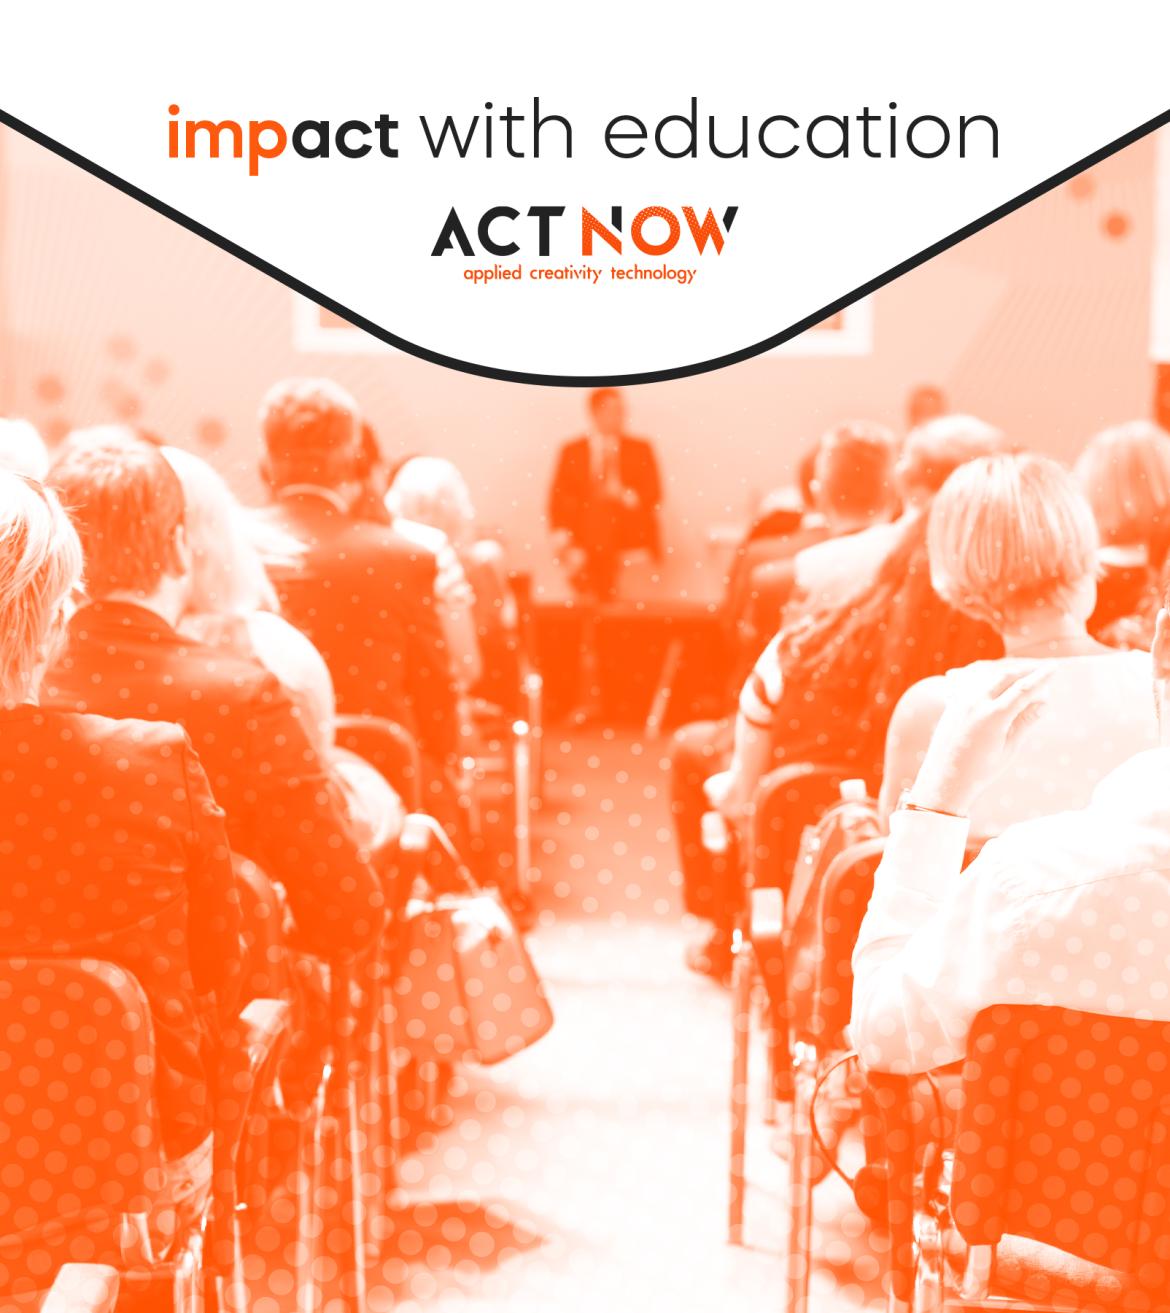 Impact with education